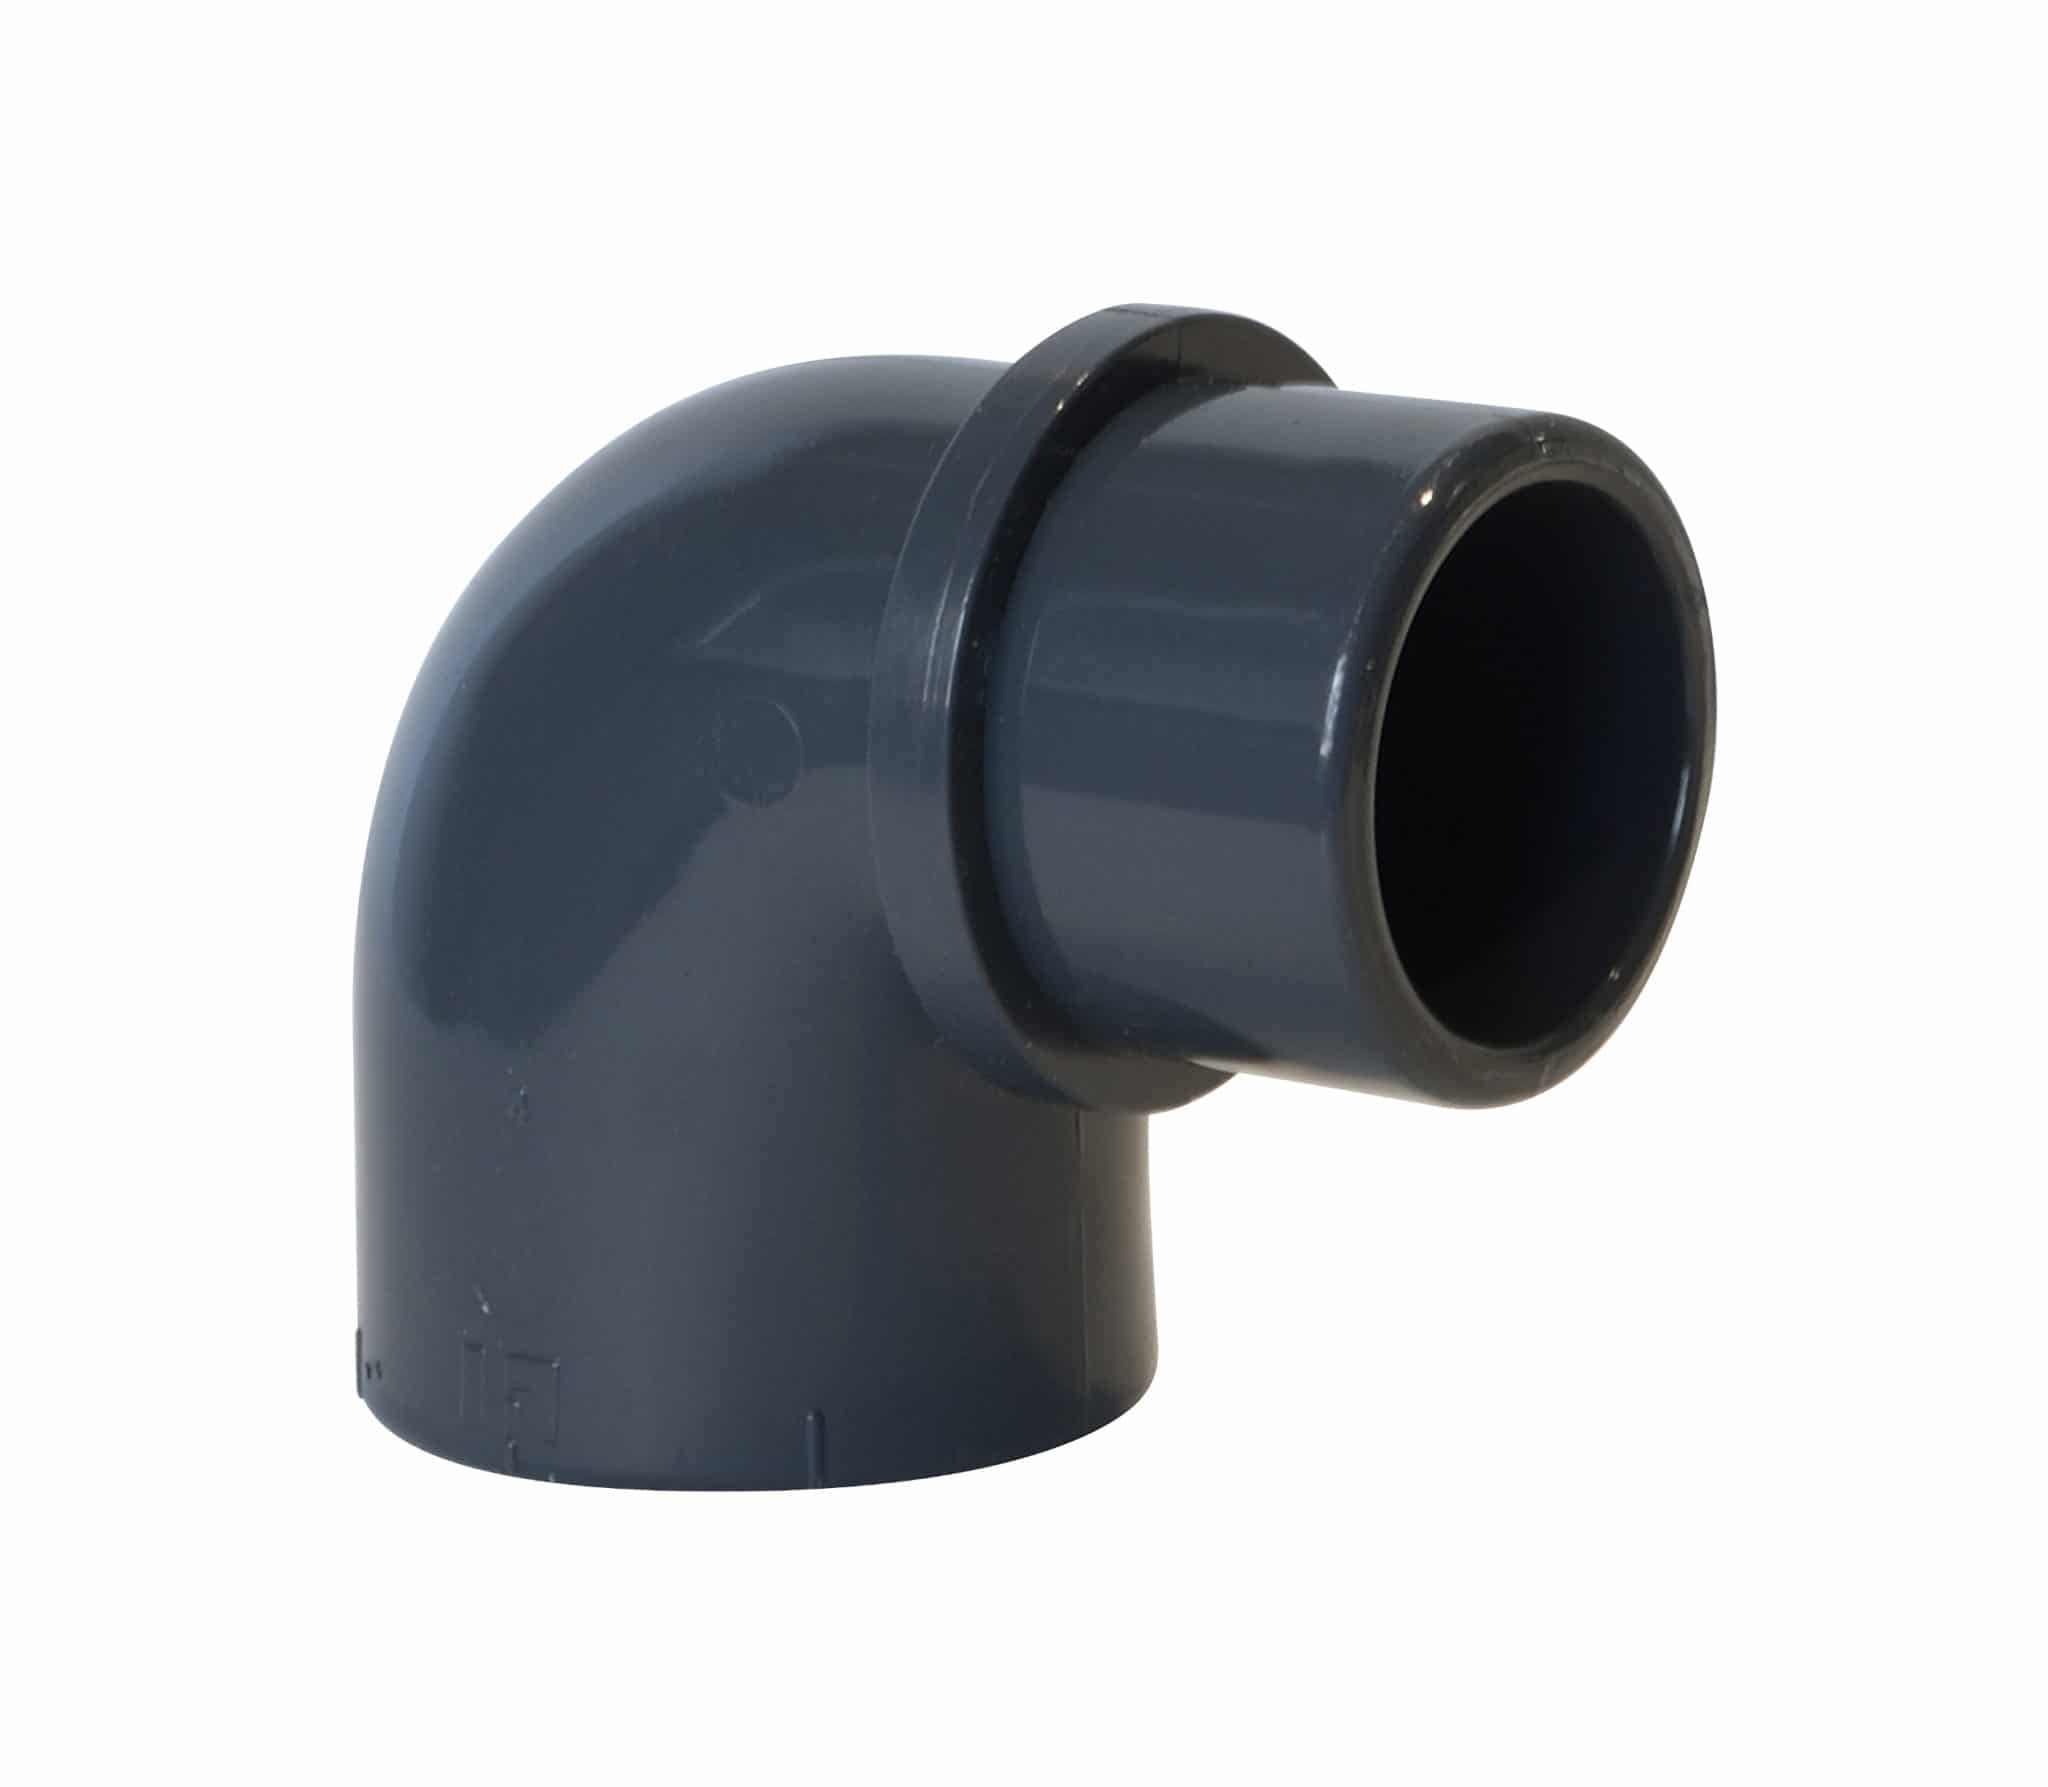 PVC-U Reduced elbow 90° - EFFAST - 100% Made in Italy